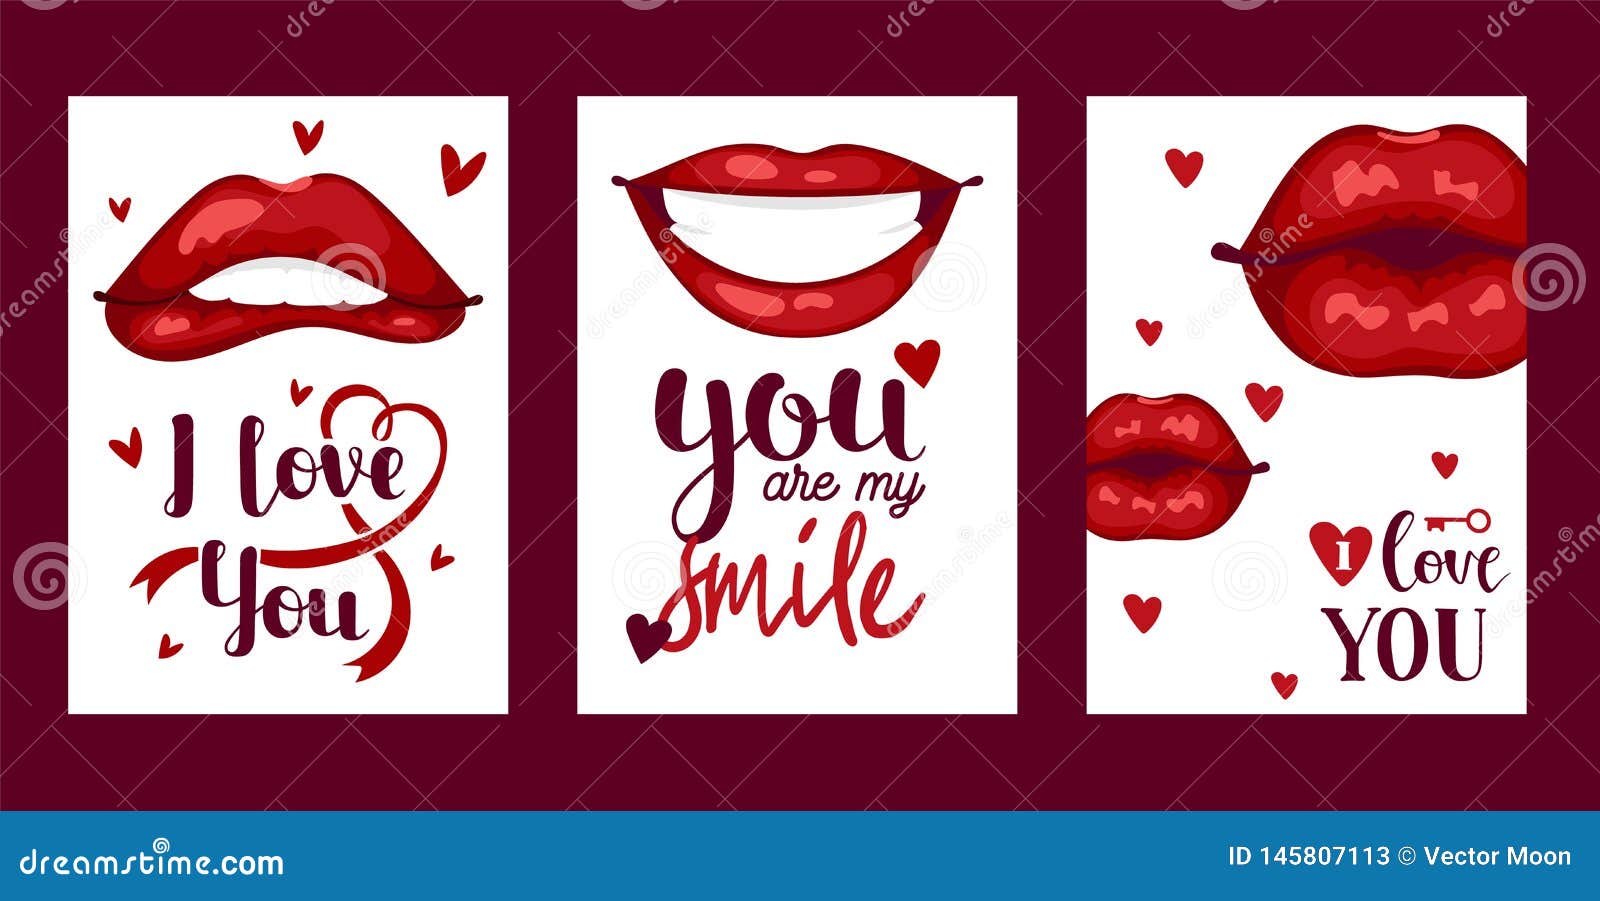 Lip Vector Pattern Cartoon Beautiful Red Lips in Kiss or Smile Fashion  Lipstick Mouth Kissing Lovely on Valentines Stock Vector - Illustration of  human, lover: 145807113